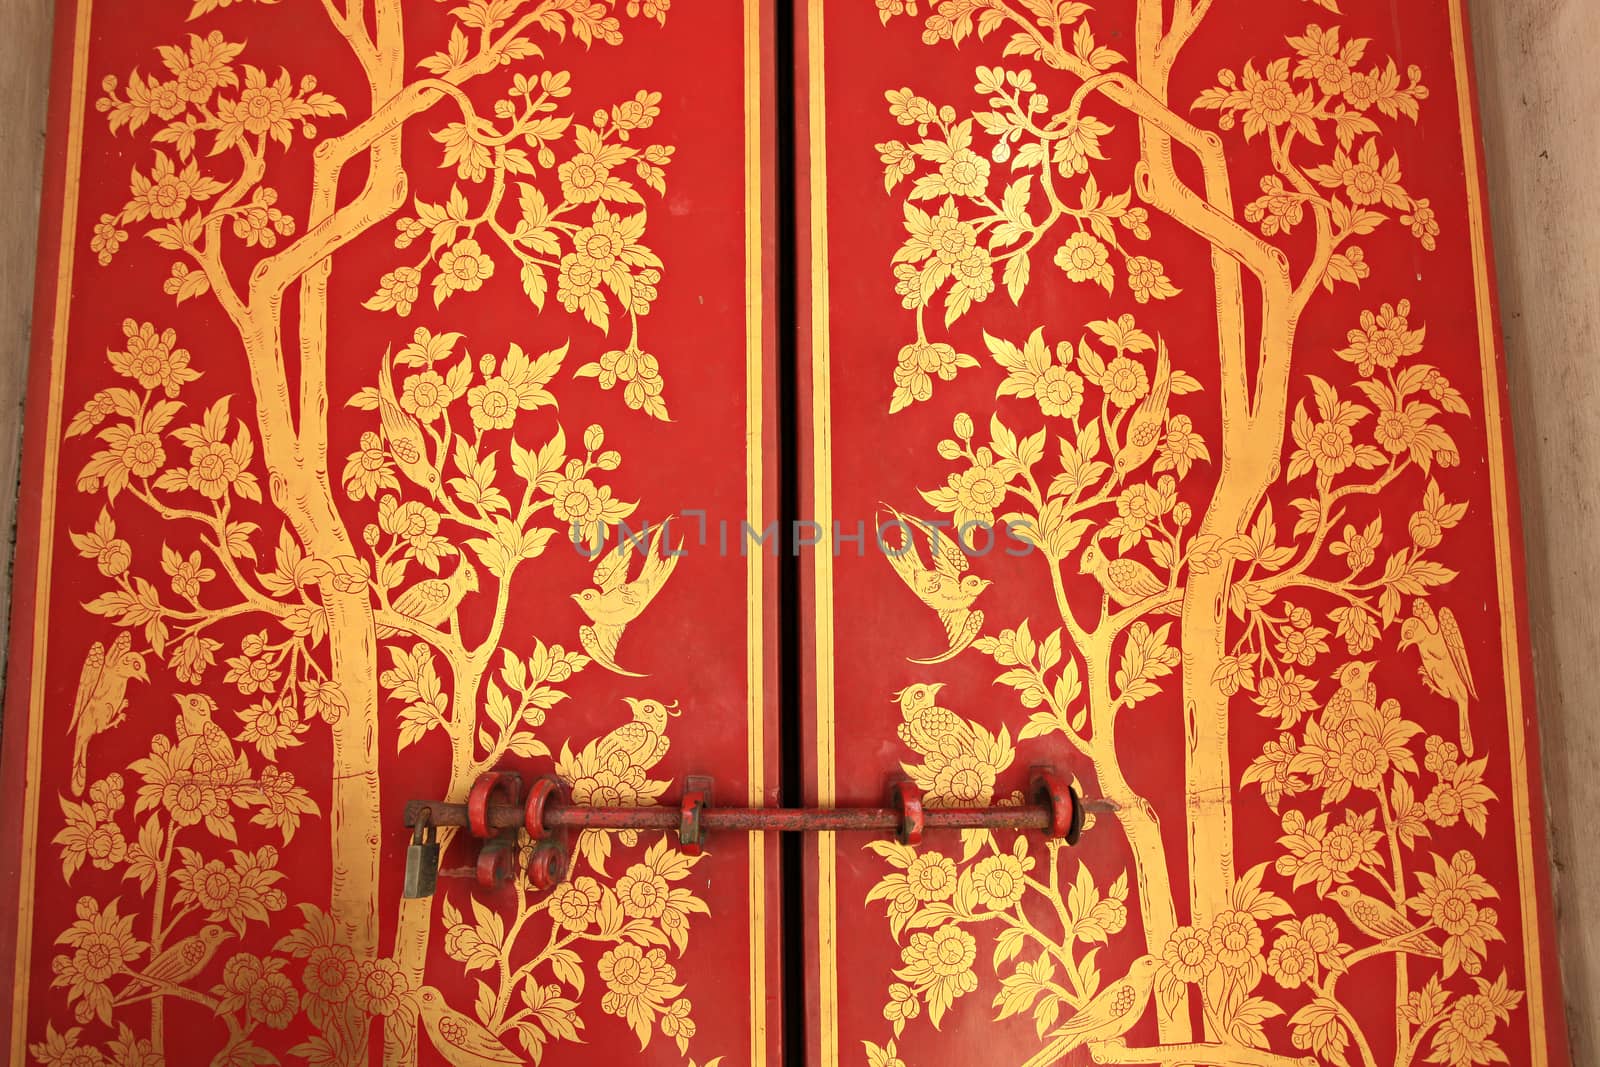 Traditional Chinese motifs on Chinese wooden doors in the Emerald Buddha housed, wat Phra Kaew Temple Bangkok, Thailand